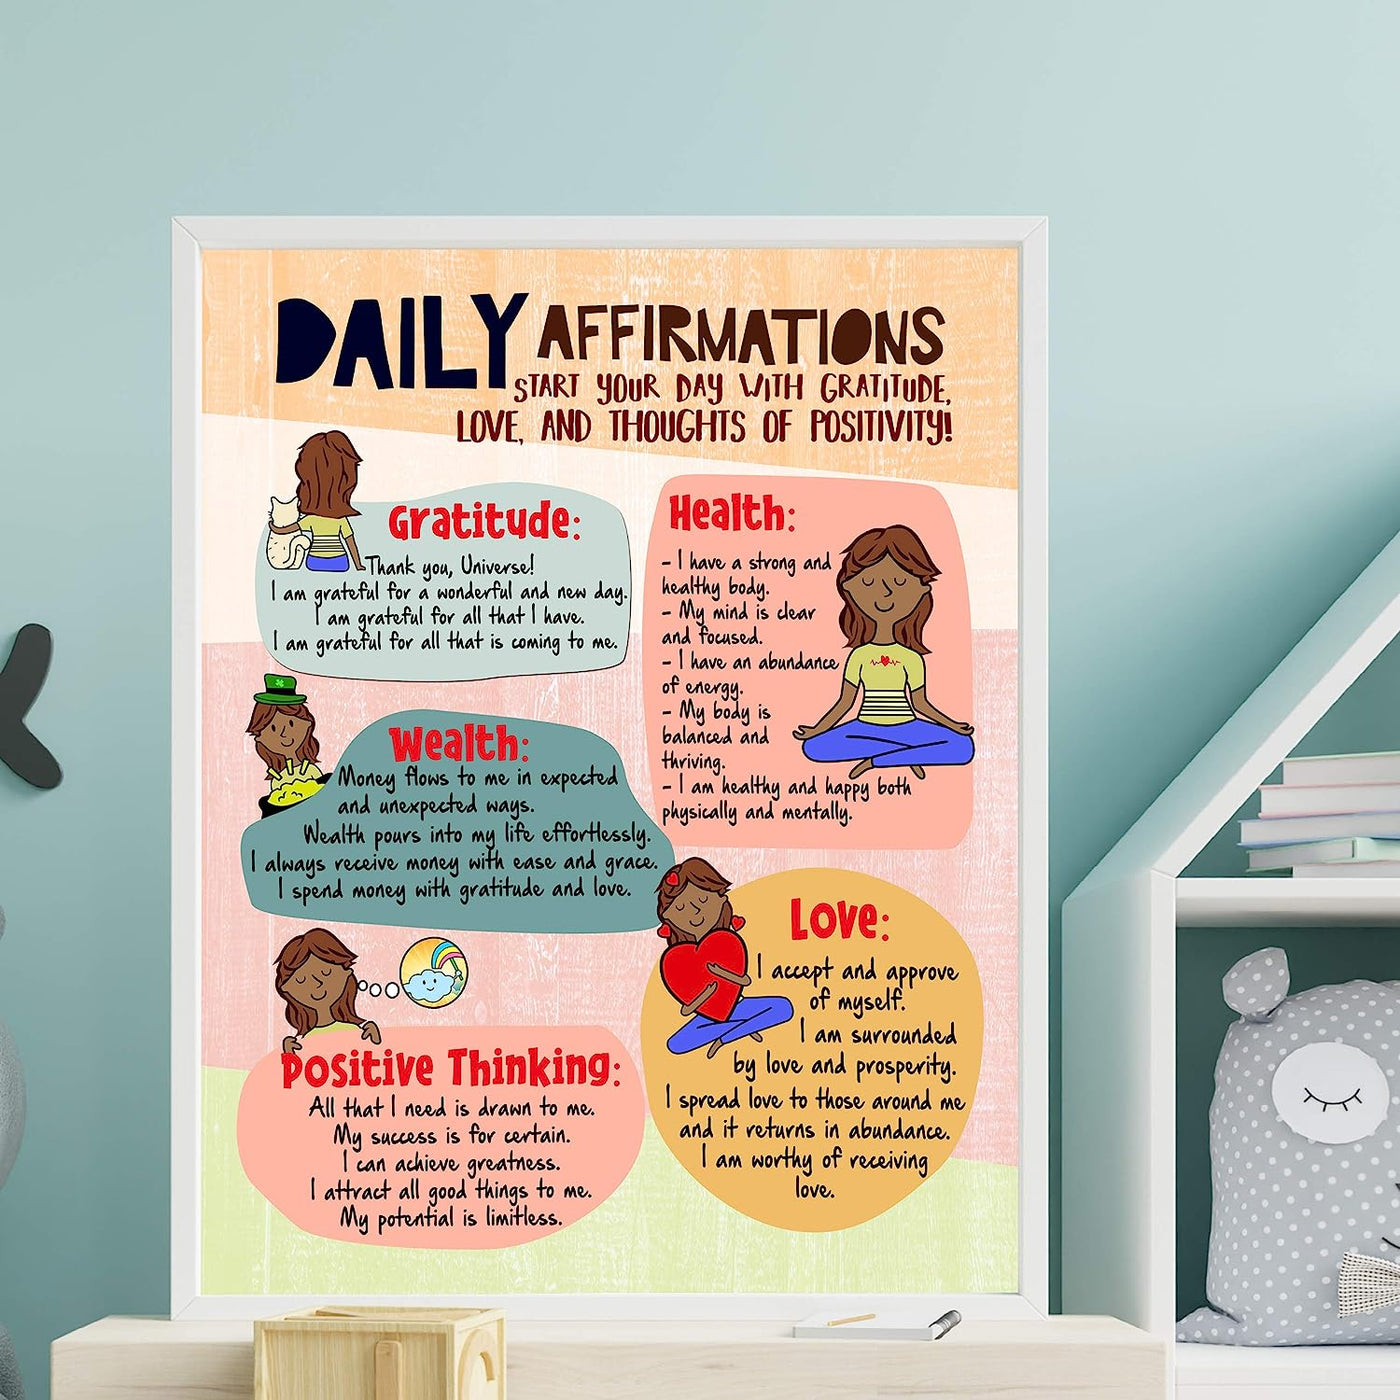 Daily Affirmations to Start Your Day Motivational Quotes Wall Decor -11 x 14" Typographic Art Print-Ready to Frame. Inspirational Home-Office-Studio-School-Zen Decor. Positive Sign for Mindfulness!